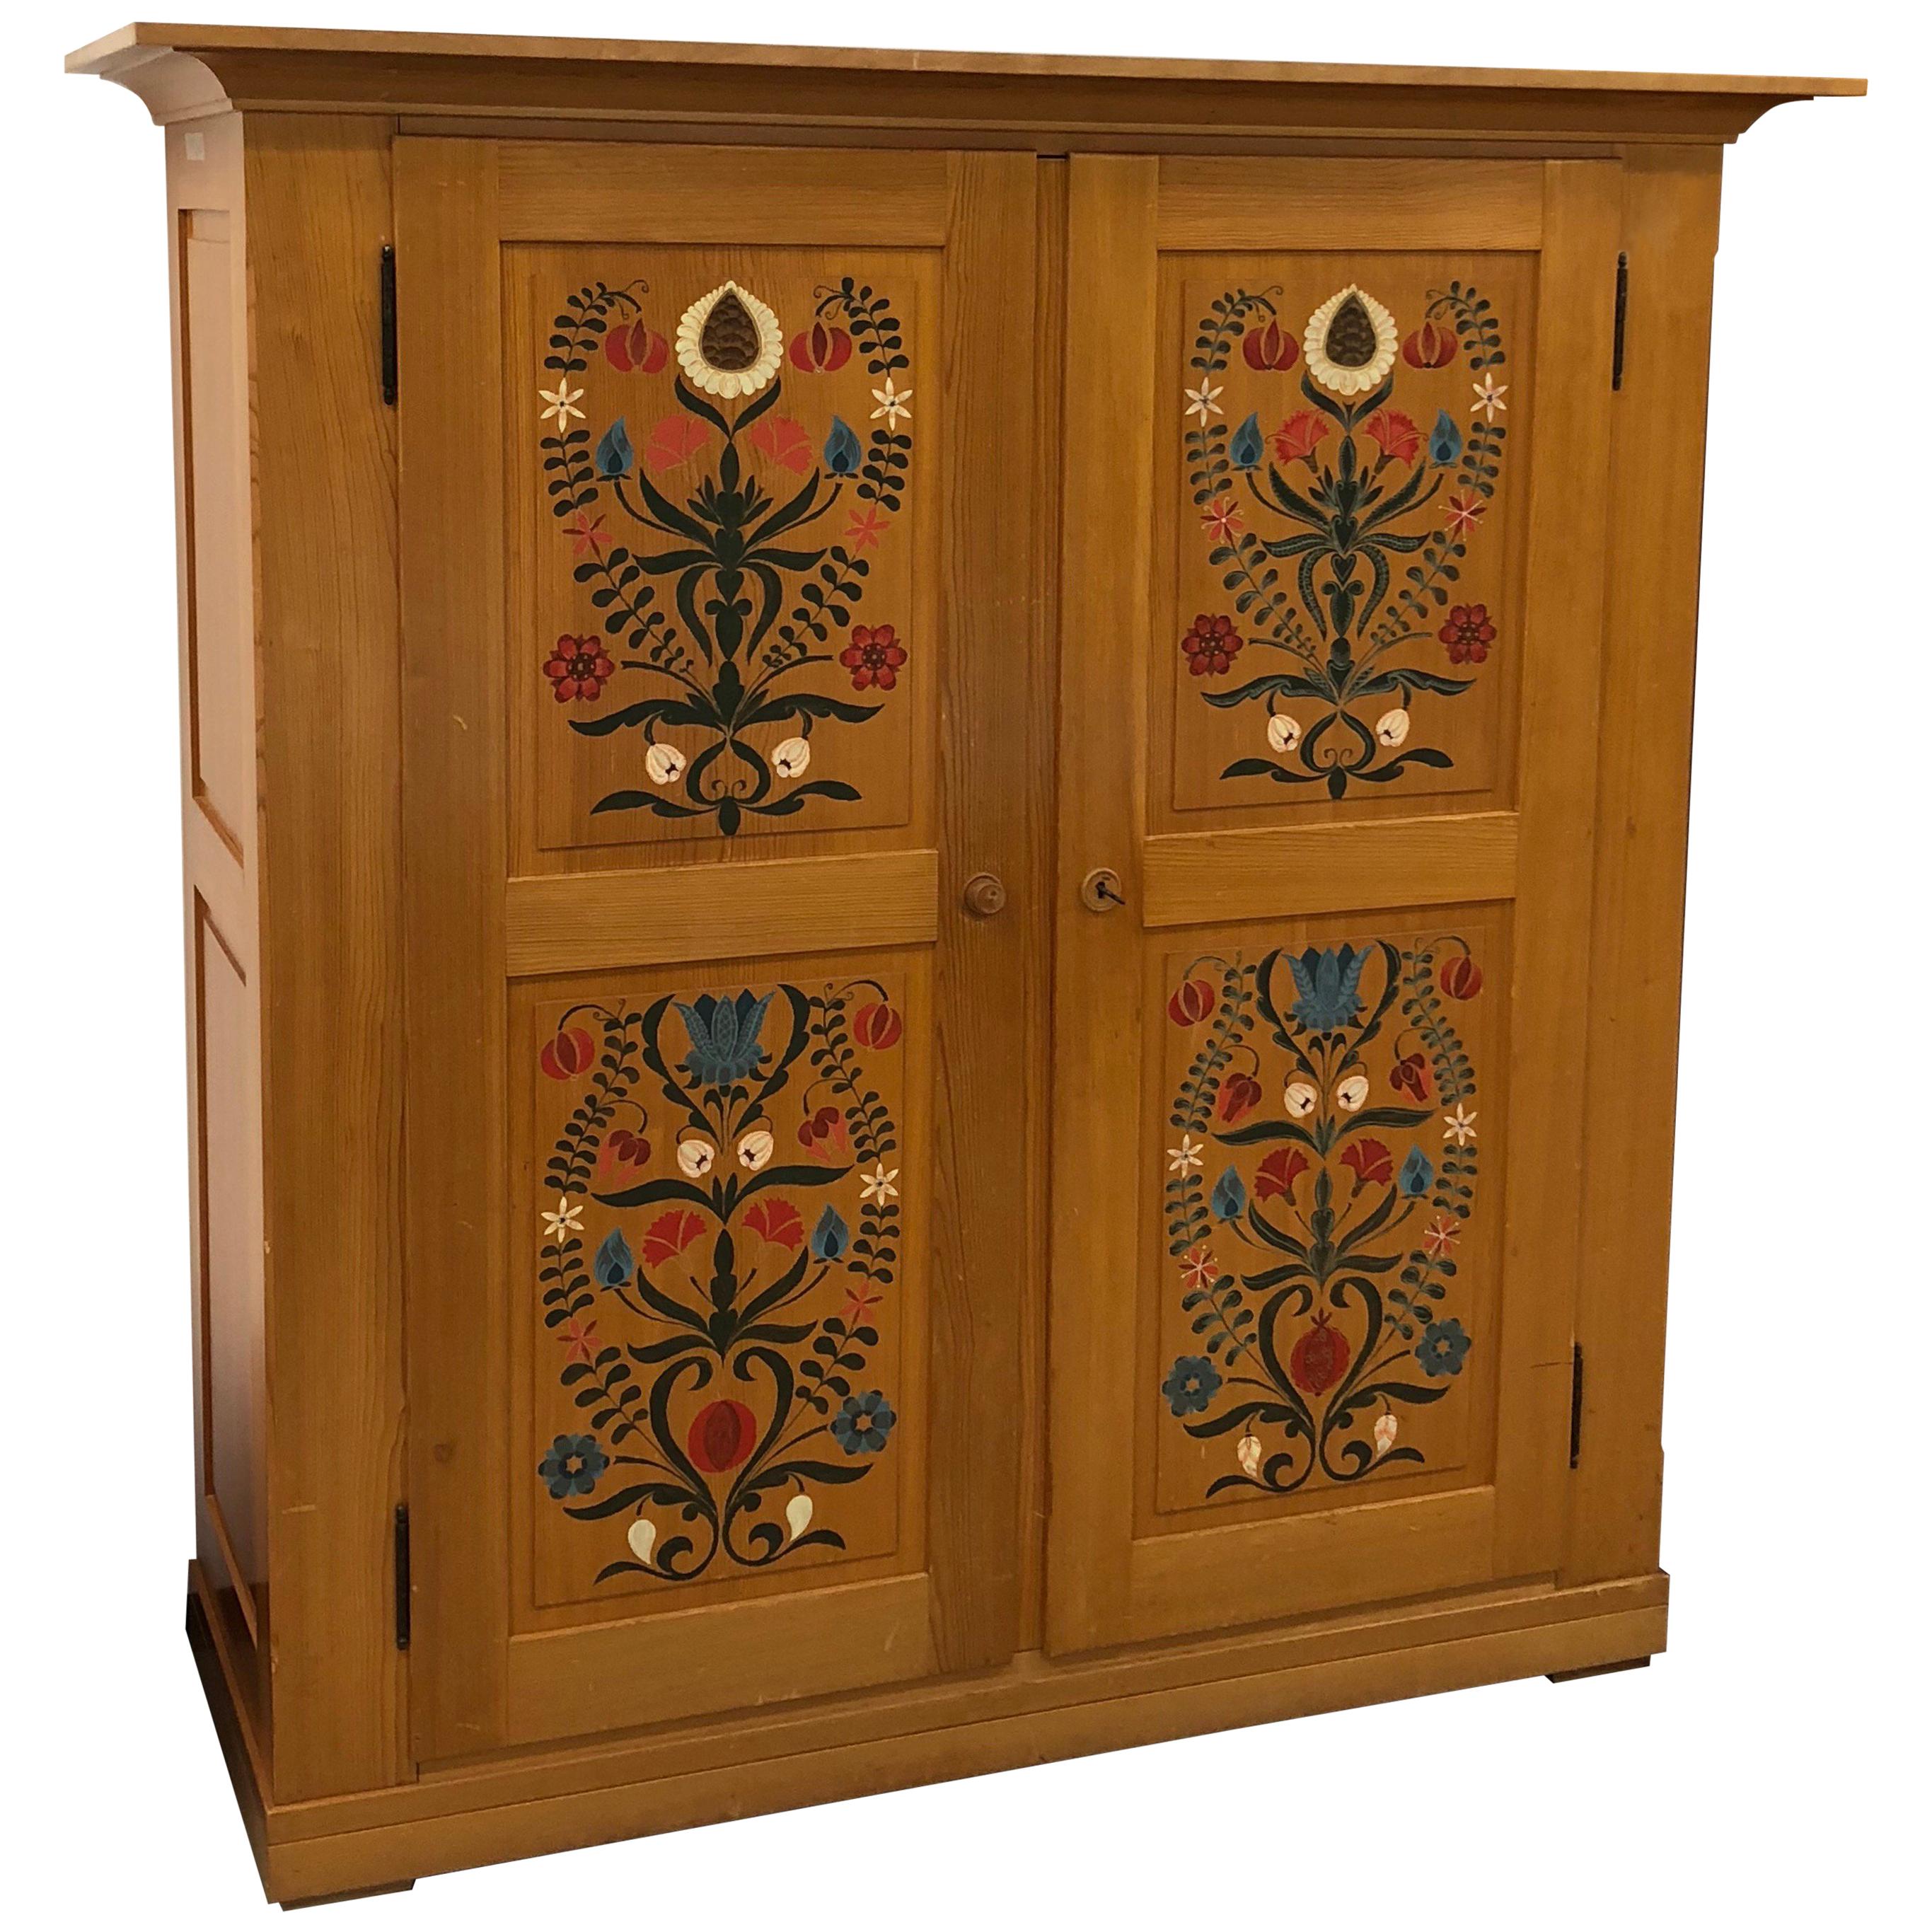 Rustic Wooden Hand Painted Wardrobe Armoire